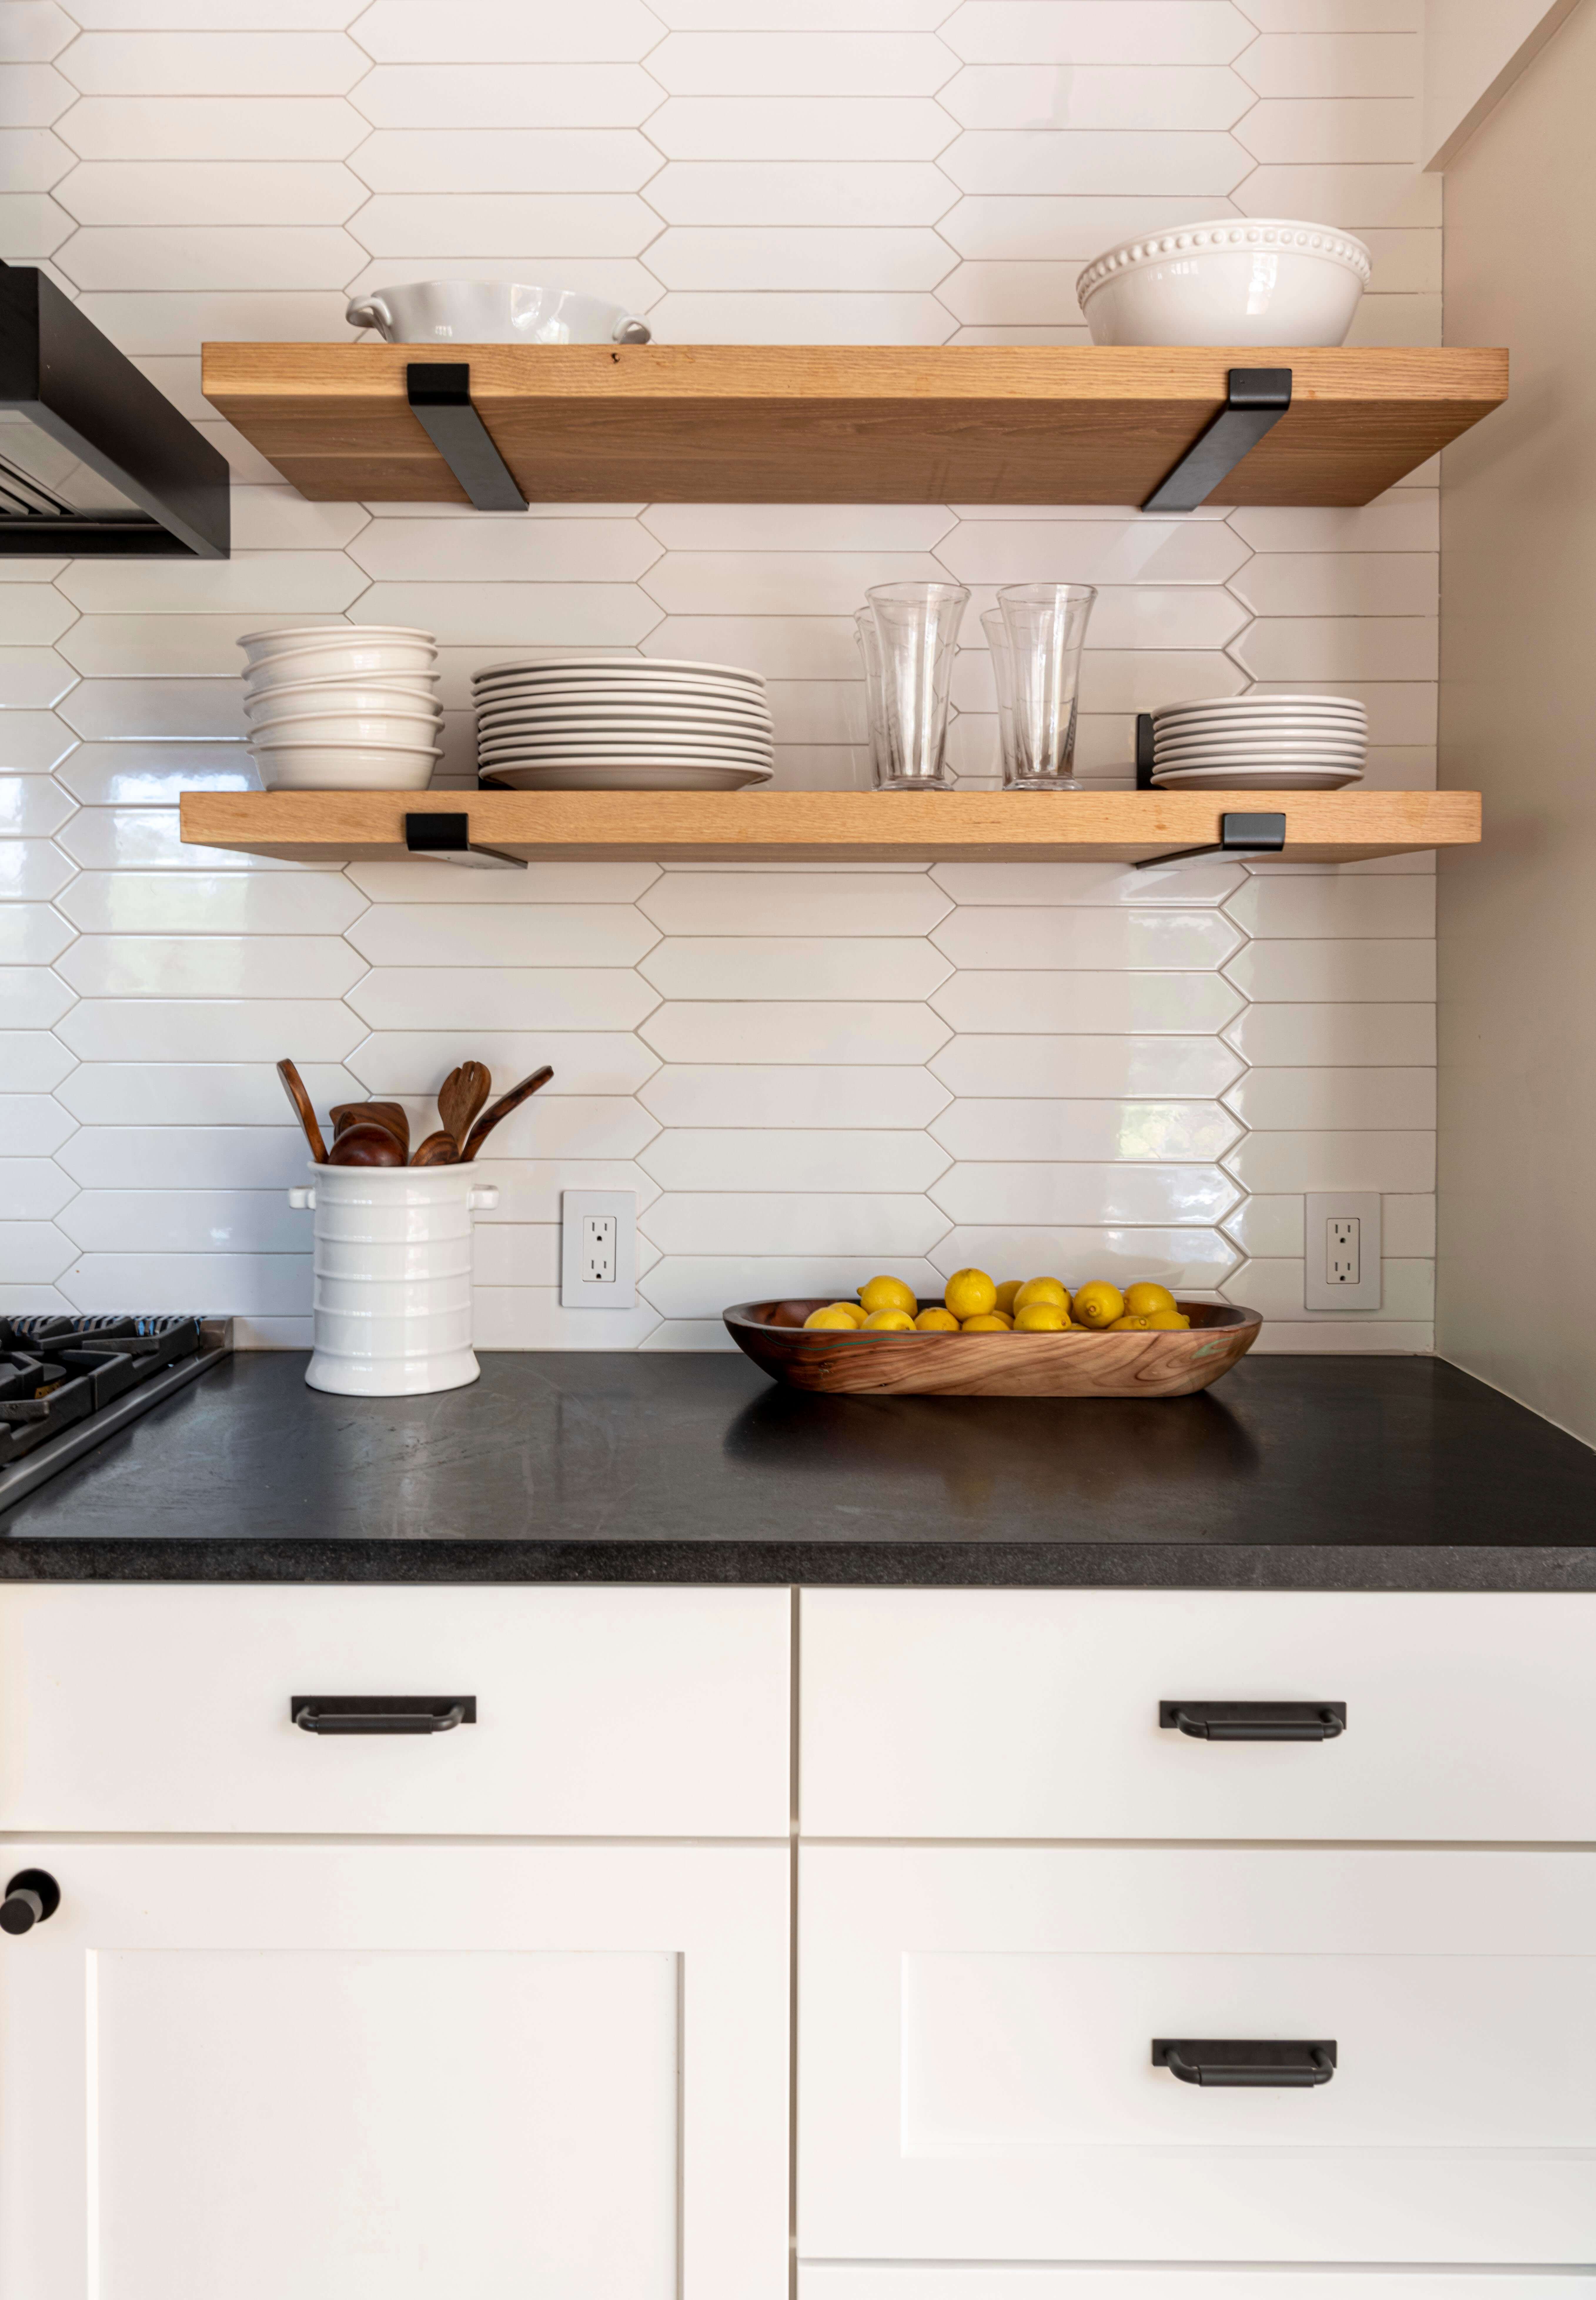 black granite countertop, white lower cabinetry, wood open shelving above